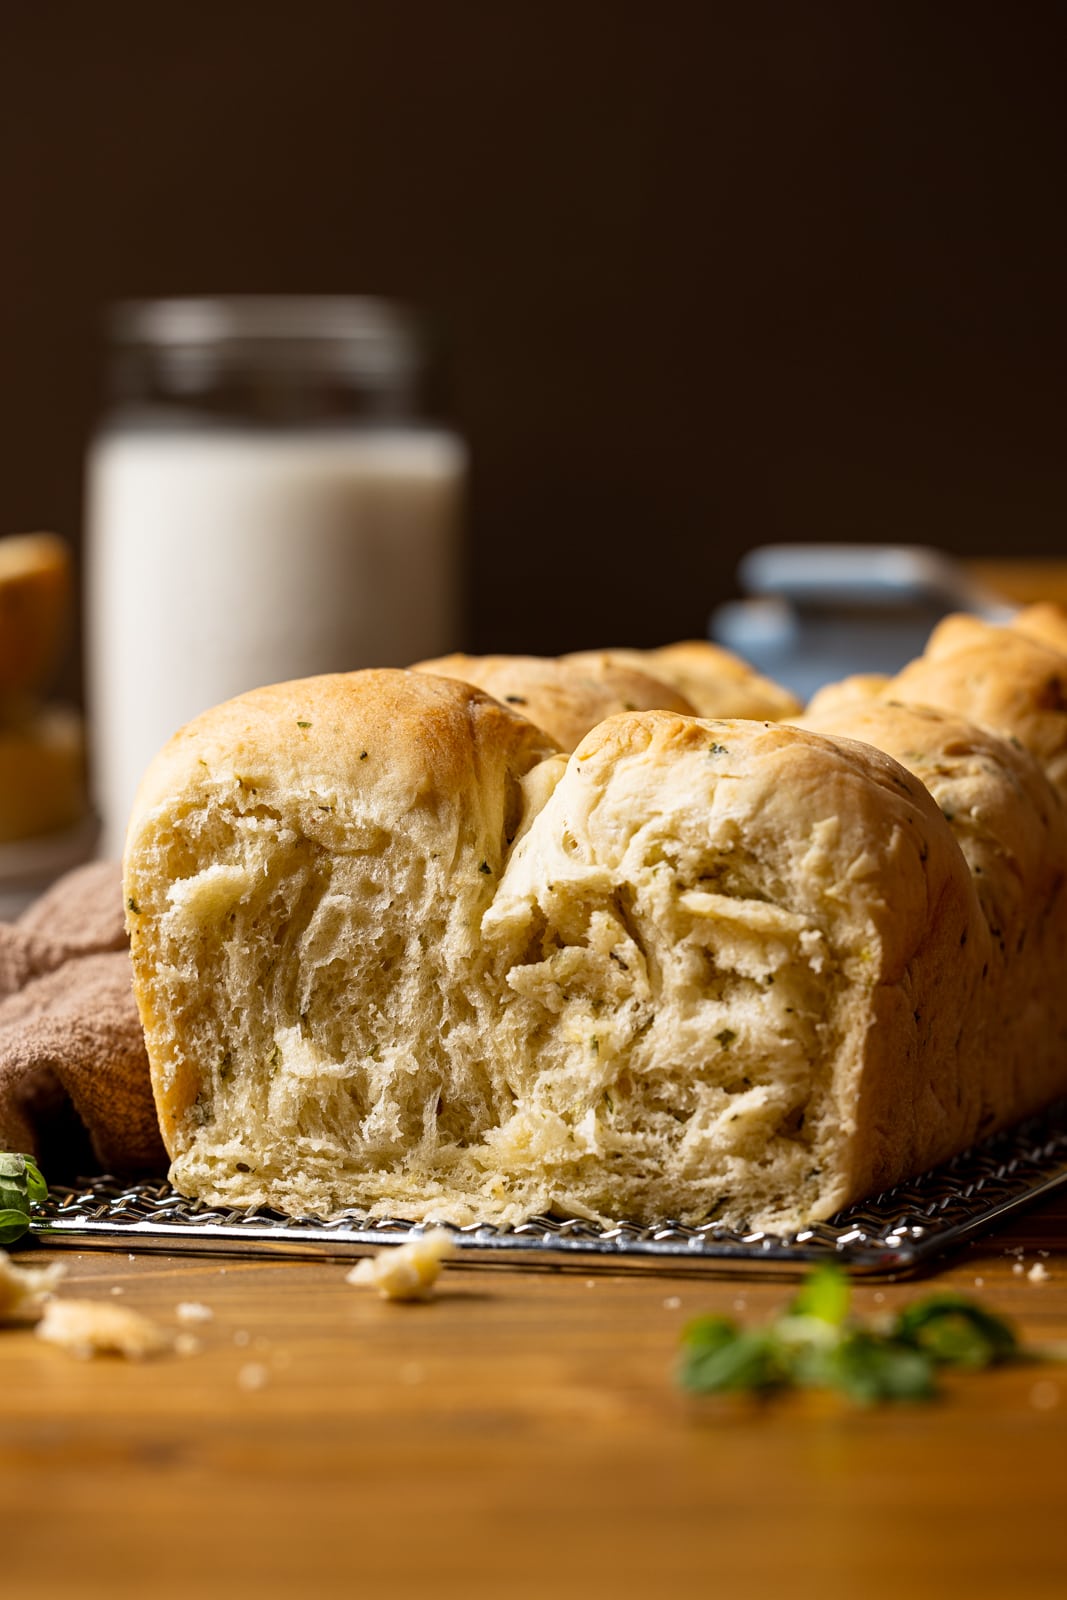 Up close shot of baked bread with a slice removed on a brown table with a cup of milk in the background.